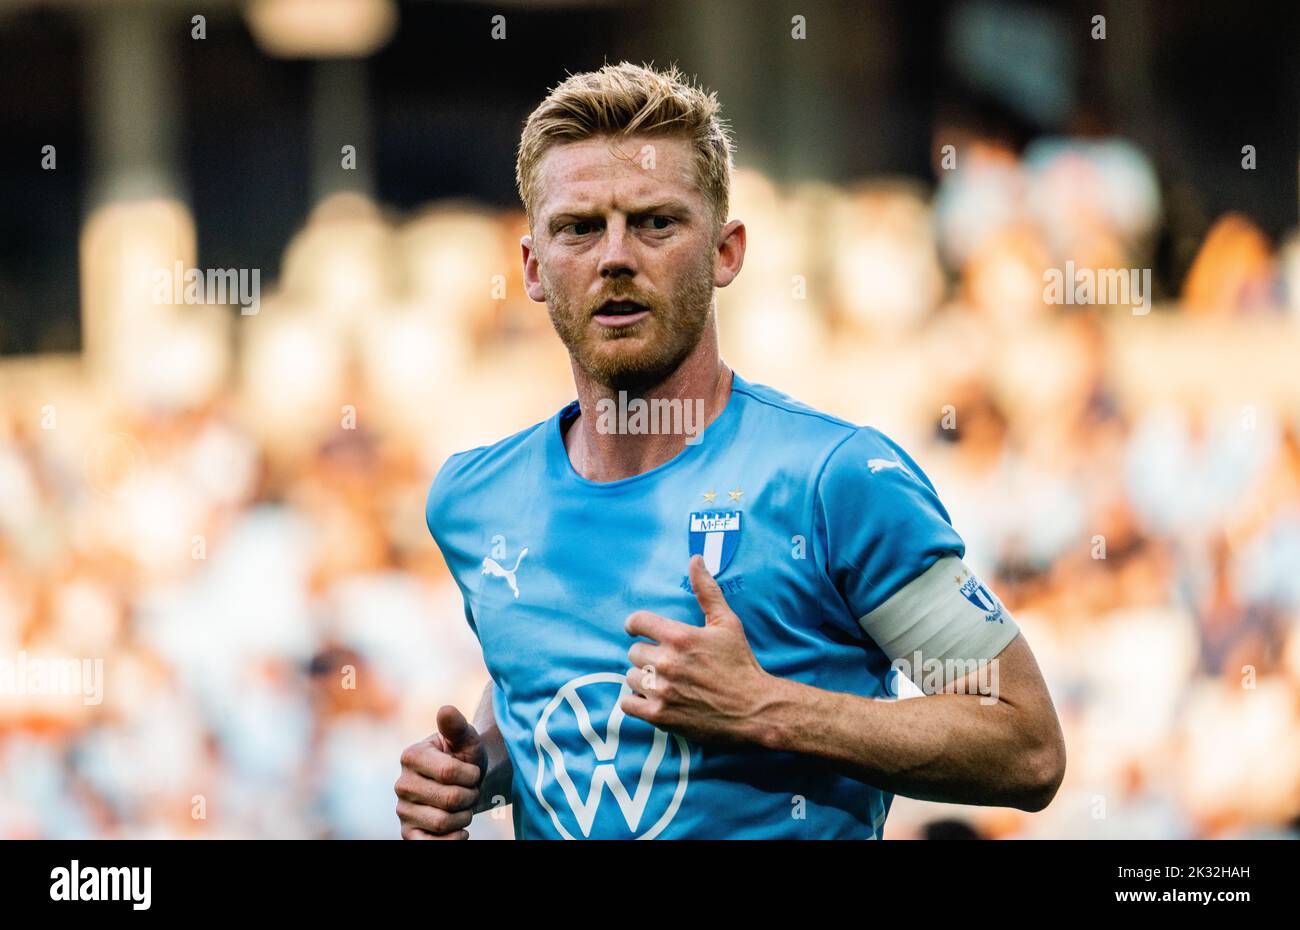 Malmoe, Sweden. 18th, August 2022. Anders Christiansen (10) of Malmö FF seen during the UEFA Europa League qualification match between Malmö FF and Sivasspor at Eleda Stadion in Malmö. (Photo credit: Gonzales Photo - Joe Miller). Stock Photo